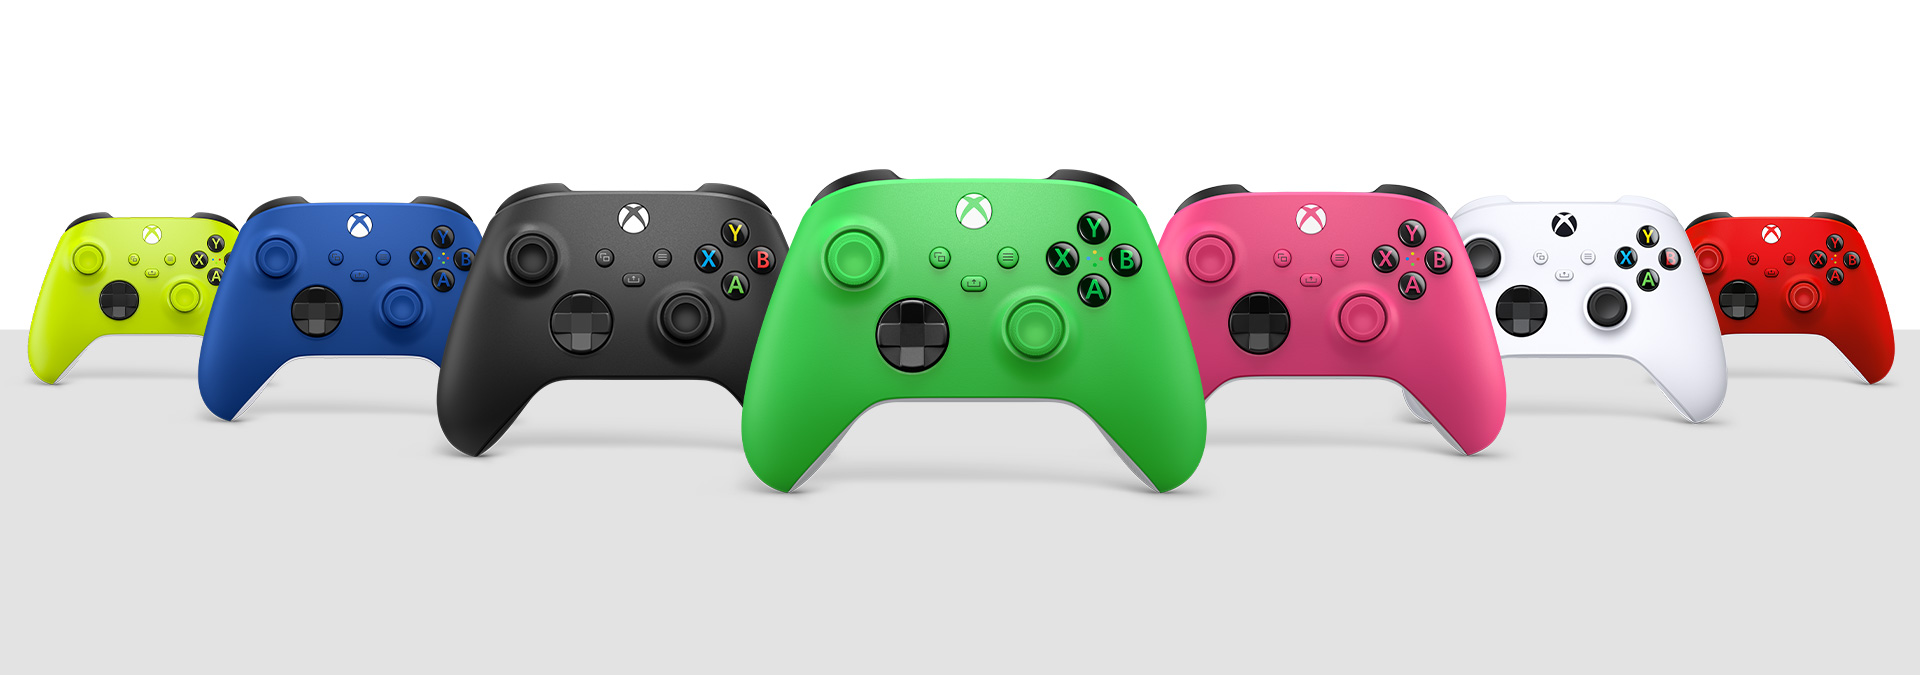 Xbox draadloze controllers in Electric Volt, Shock Blue, Carbon Black, Green, Deep Pink, Robot White en Pulse Red